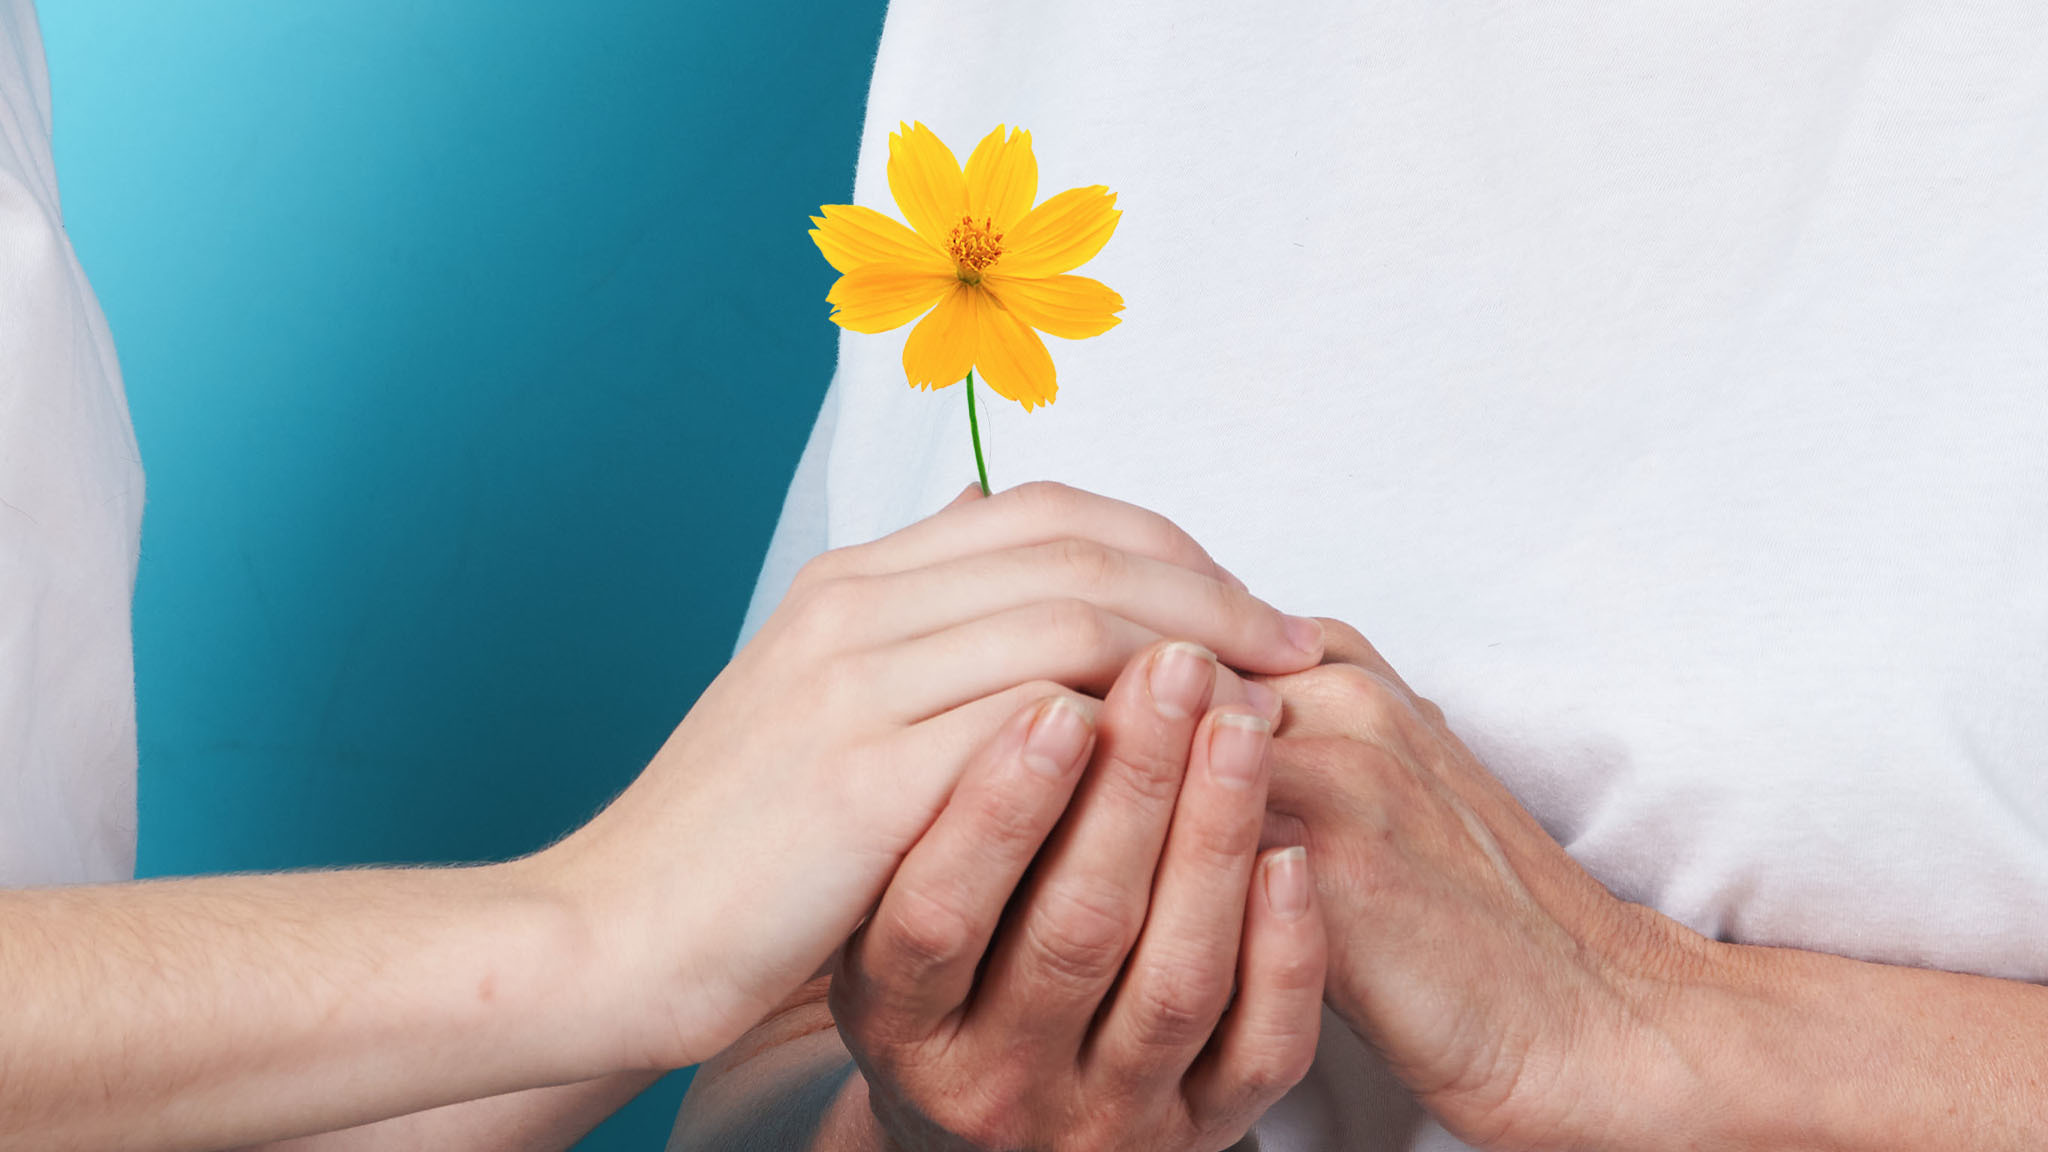 Photograph Of Two People's Hands Clasping One Another While Holding A Yellow Flower, Hope Concept